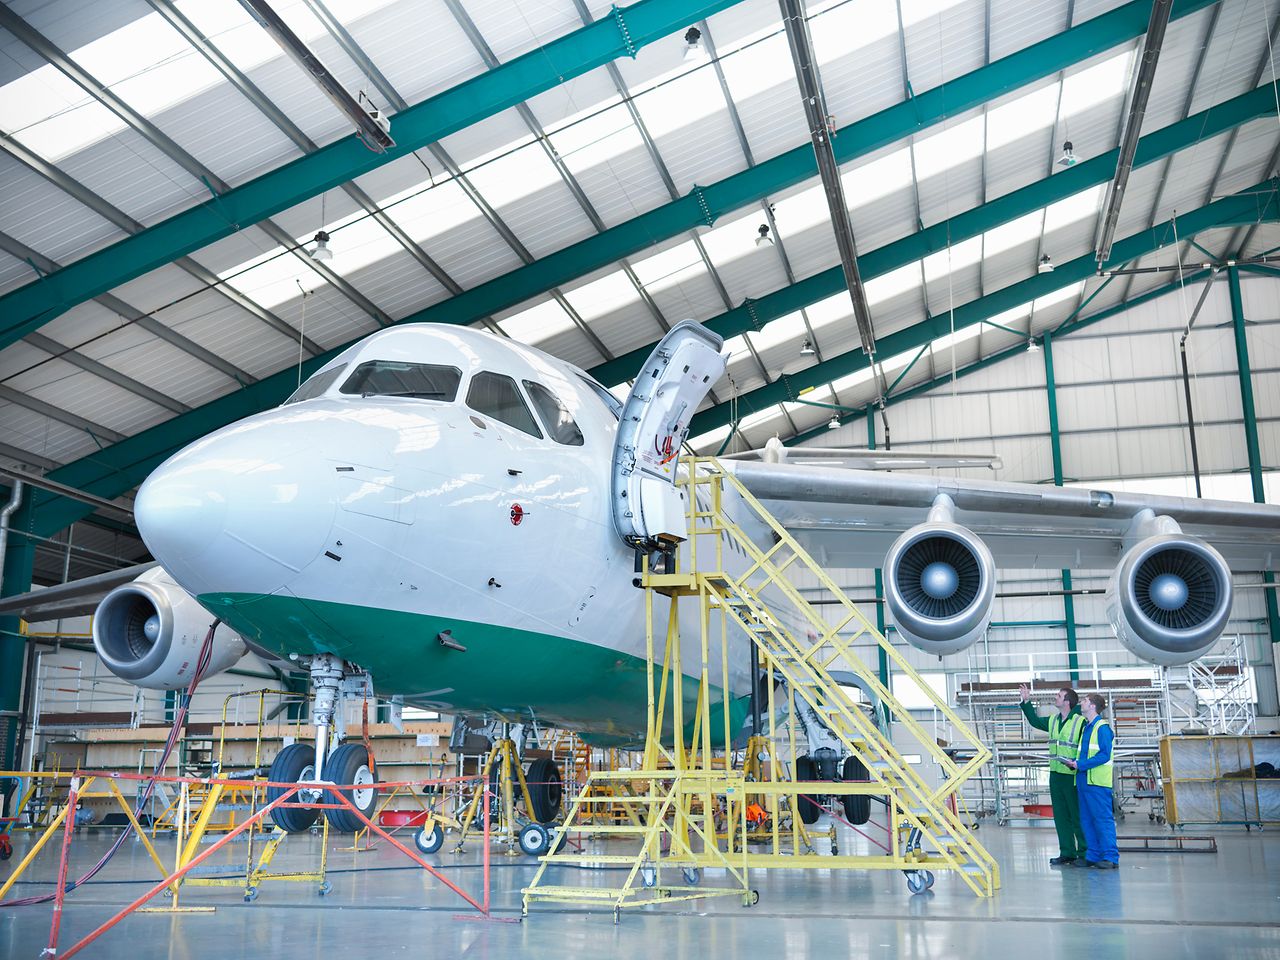 OEM’s design and construct more lightweight aircrafts with composite parts and structures